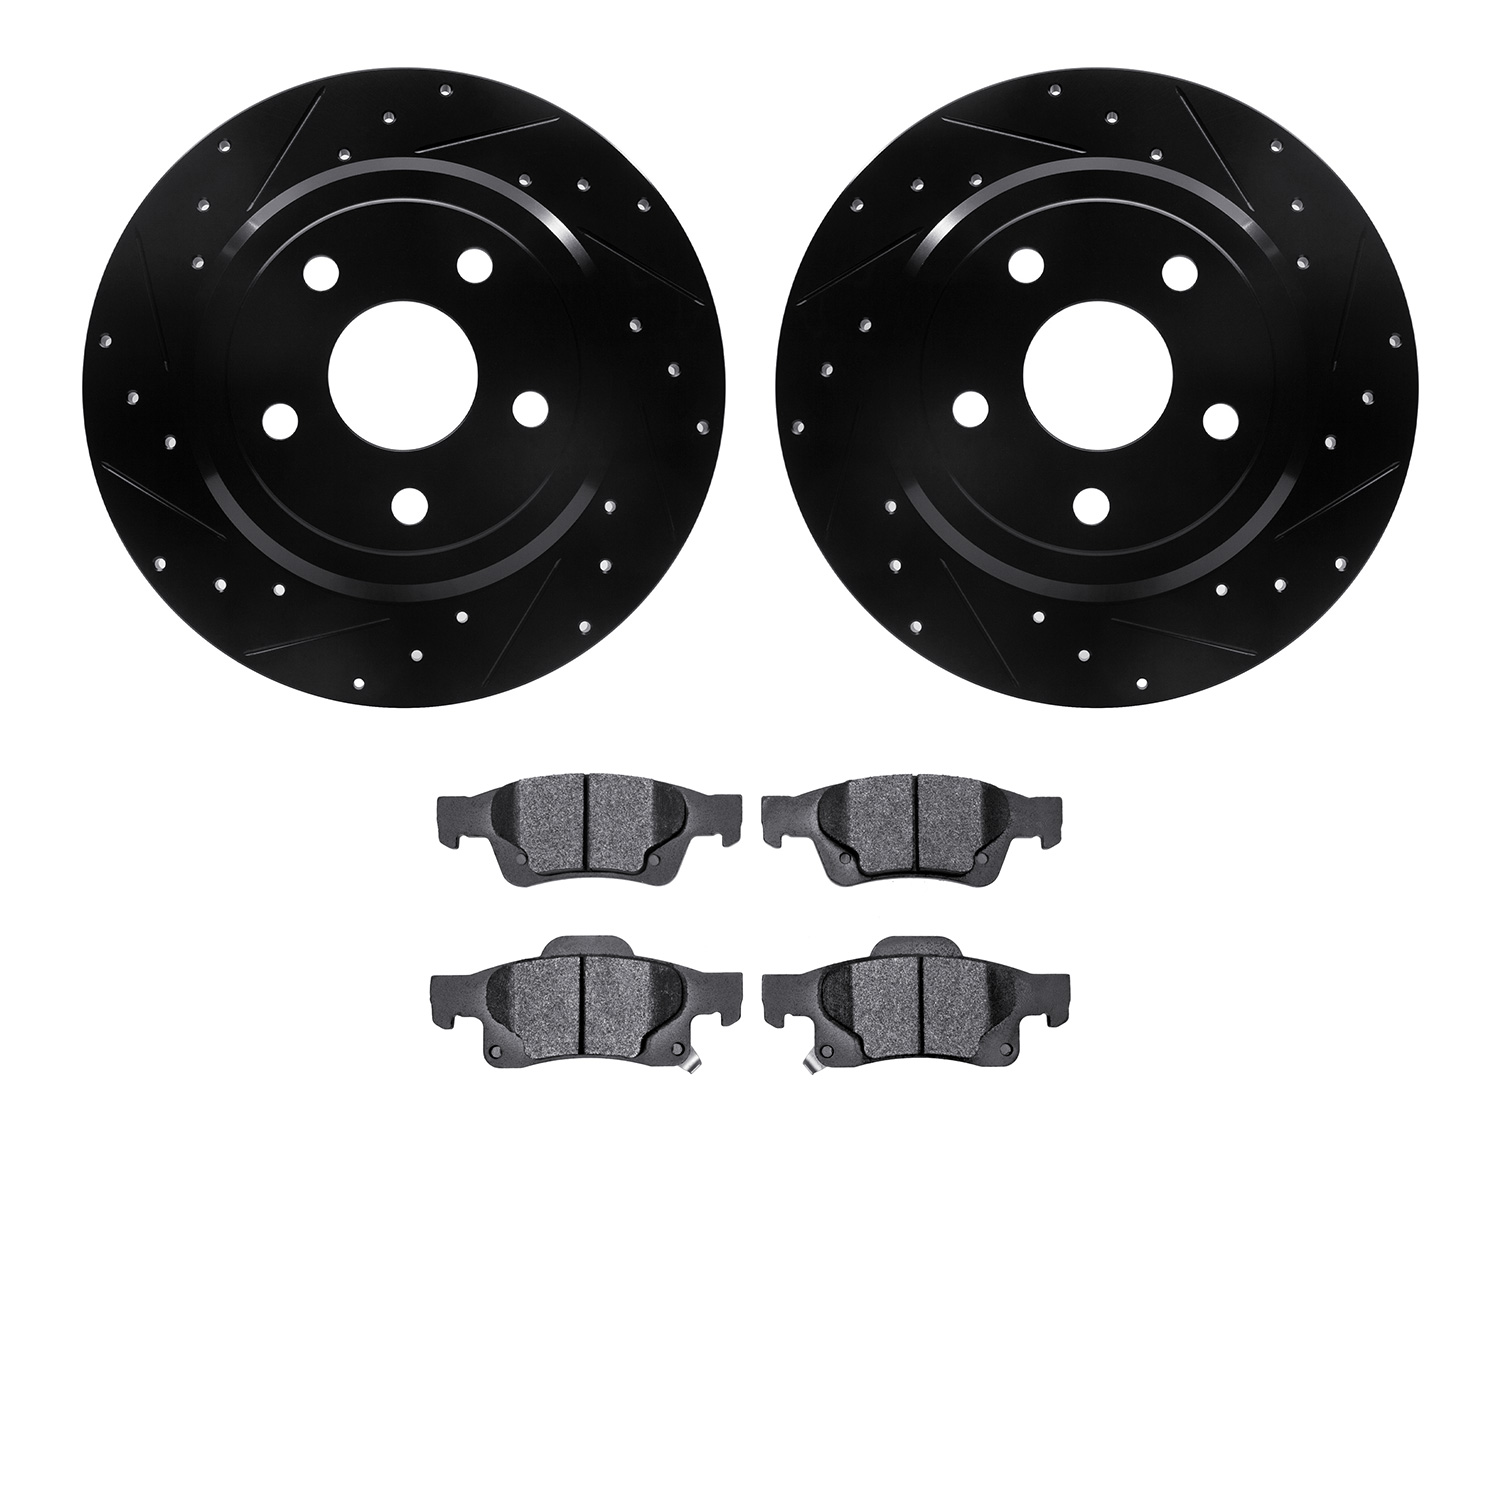 8402-42005 Drilled/Slotted Brake Rotors with Ultimate-Duty Brake Pads Kit [Black], Fits Select Mopar, Position: Rear